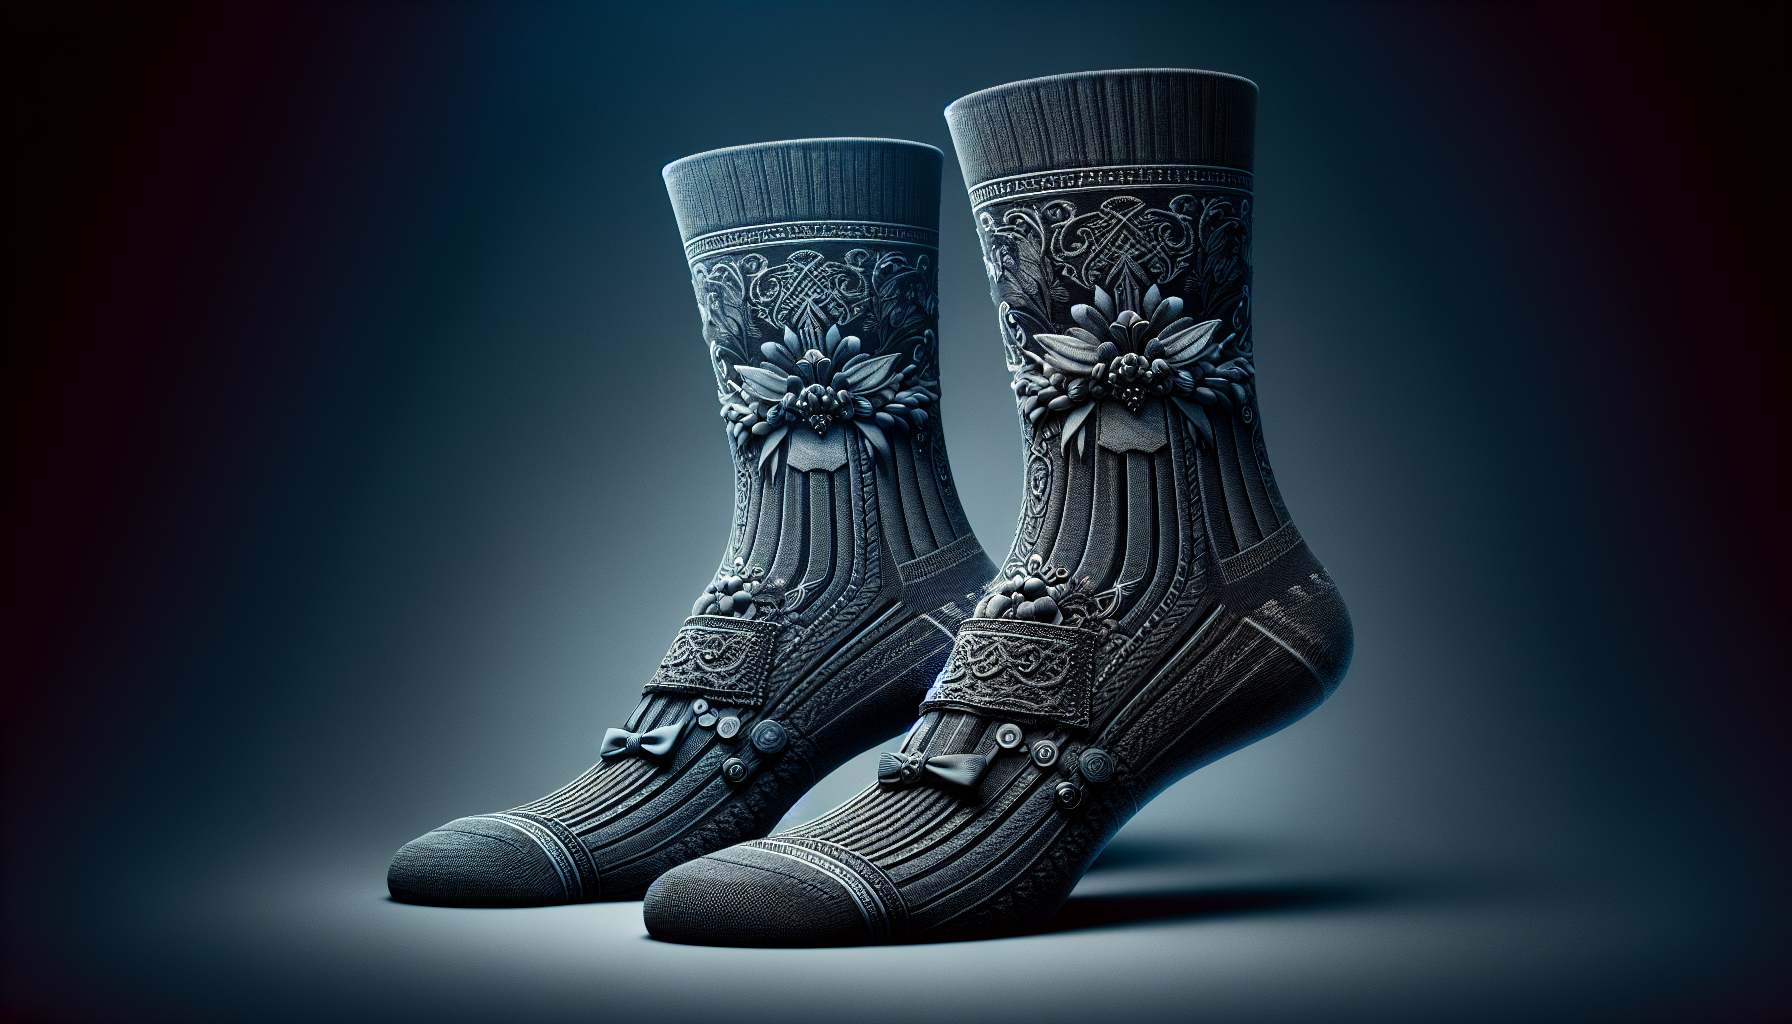 A close-up photo of a pair of stylish wedding socks with intricate and celebratory designs.